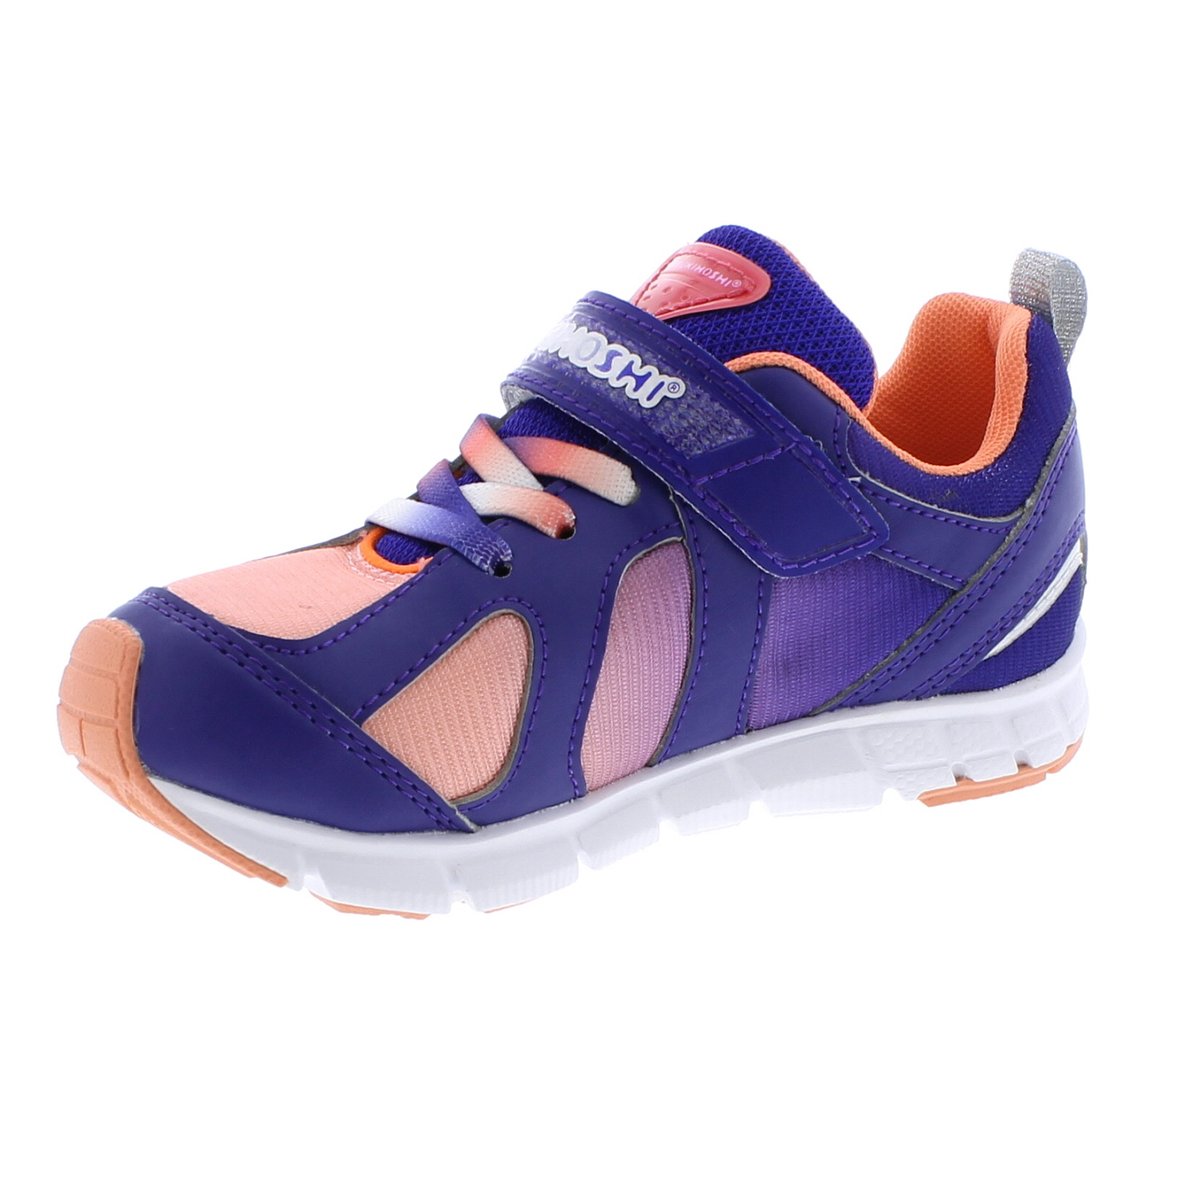 Child Tsukihoshi Rainbow Sneaker in Violet/Peach from the front view